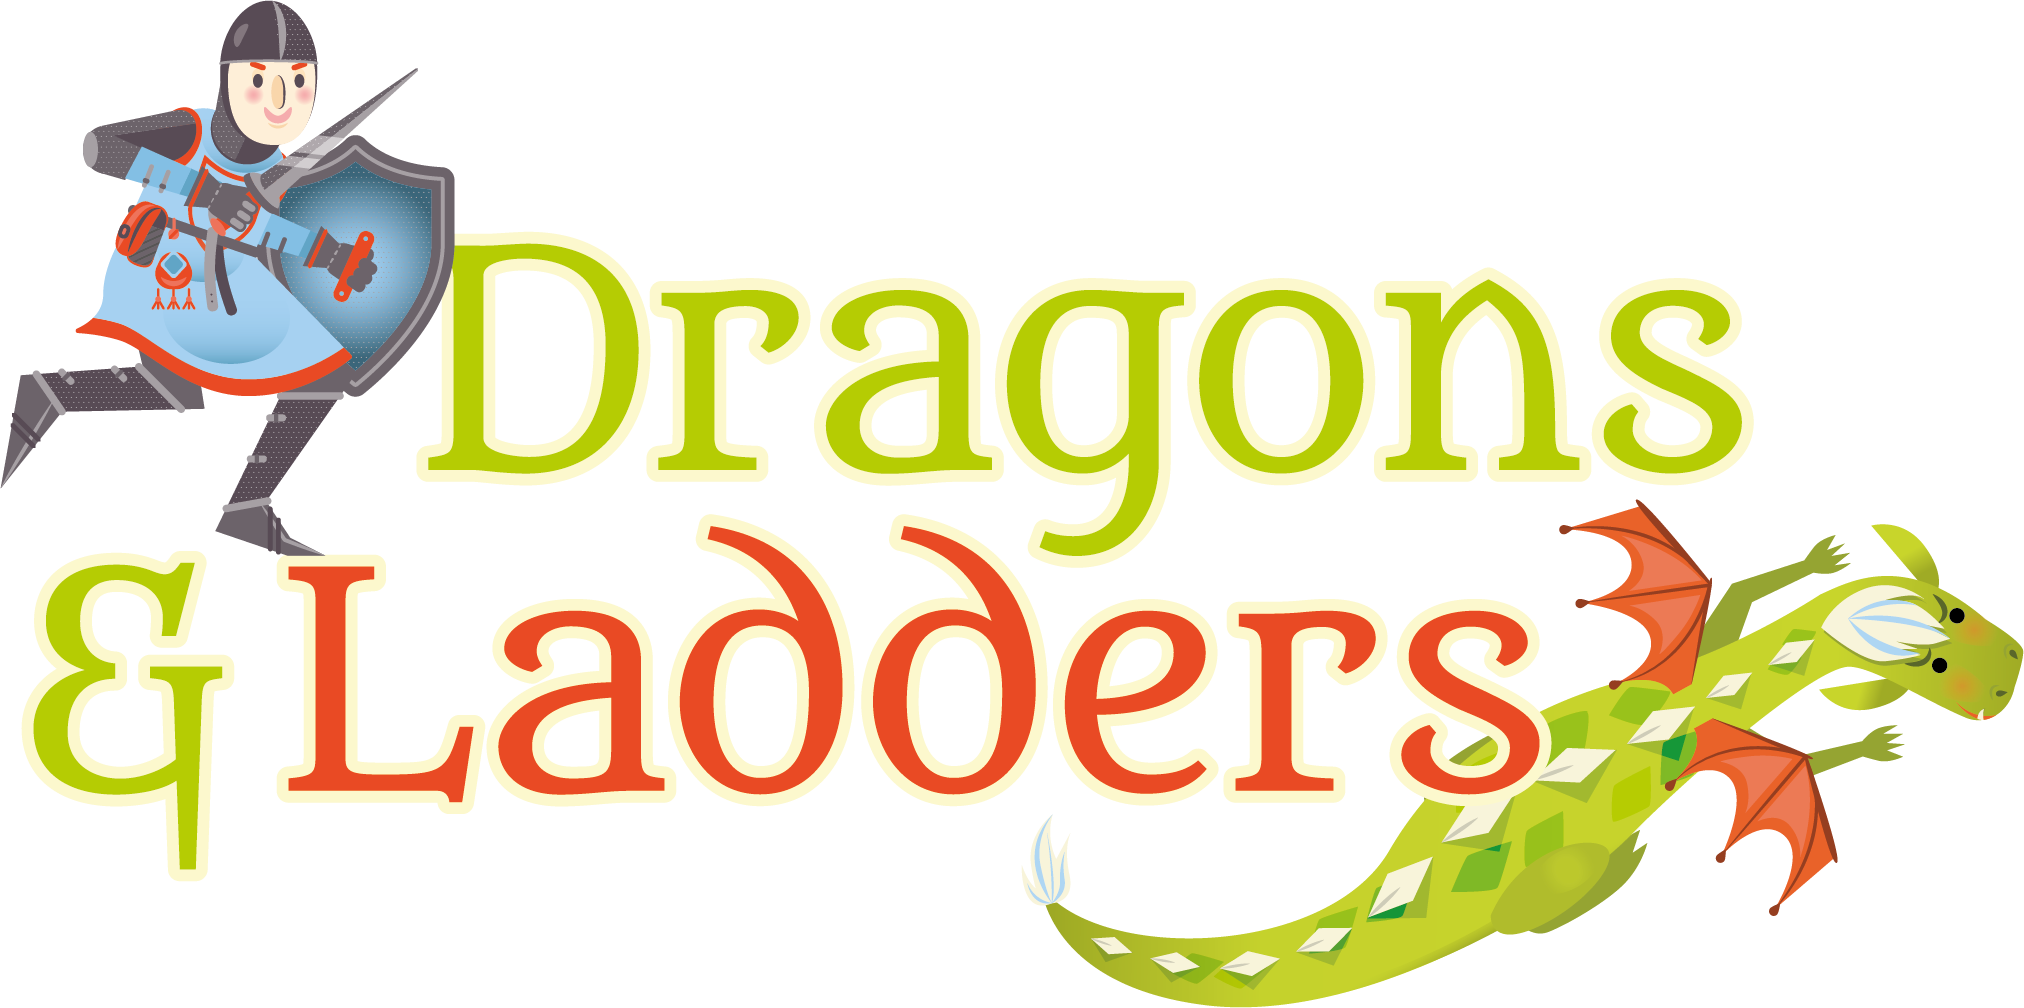 Royal Armouries: Dragons & Ladders — Buttercrumble – Design Firm